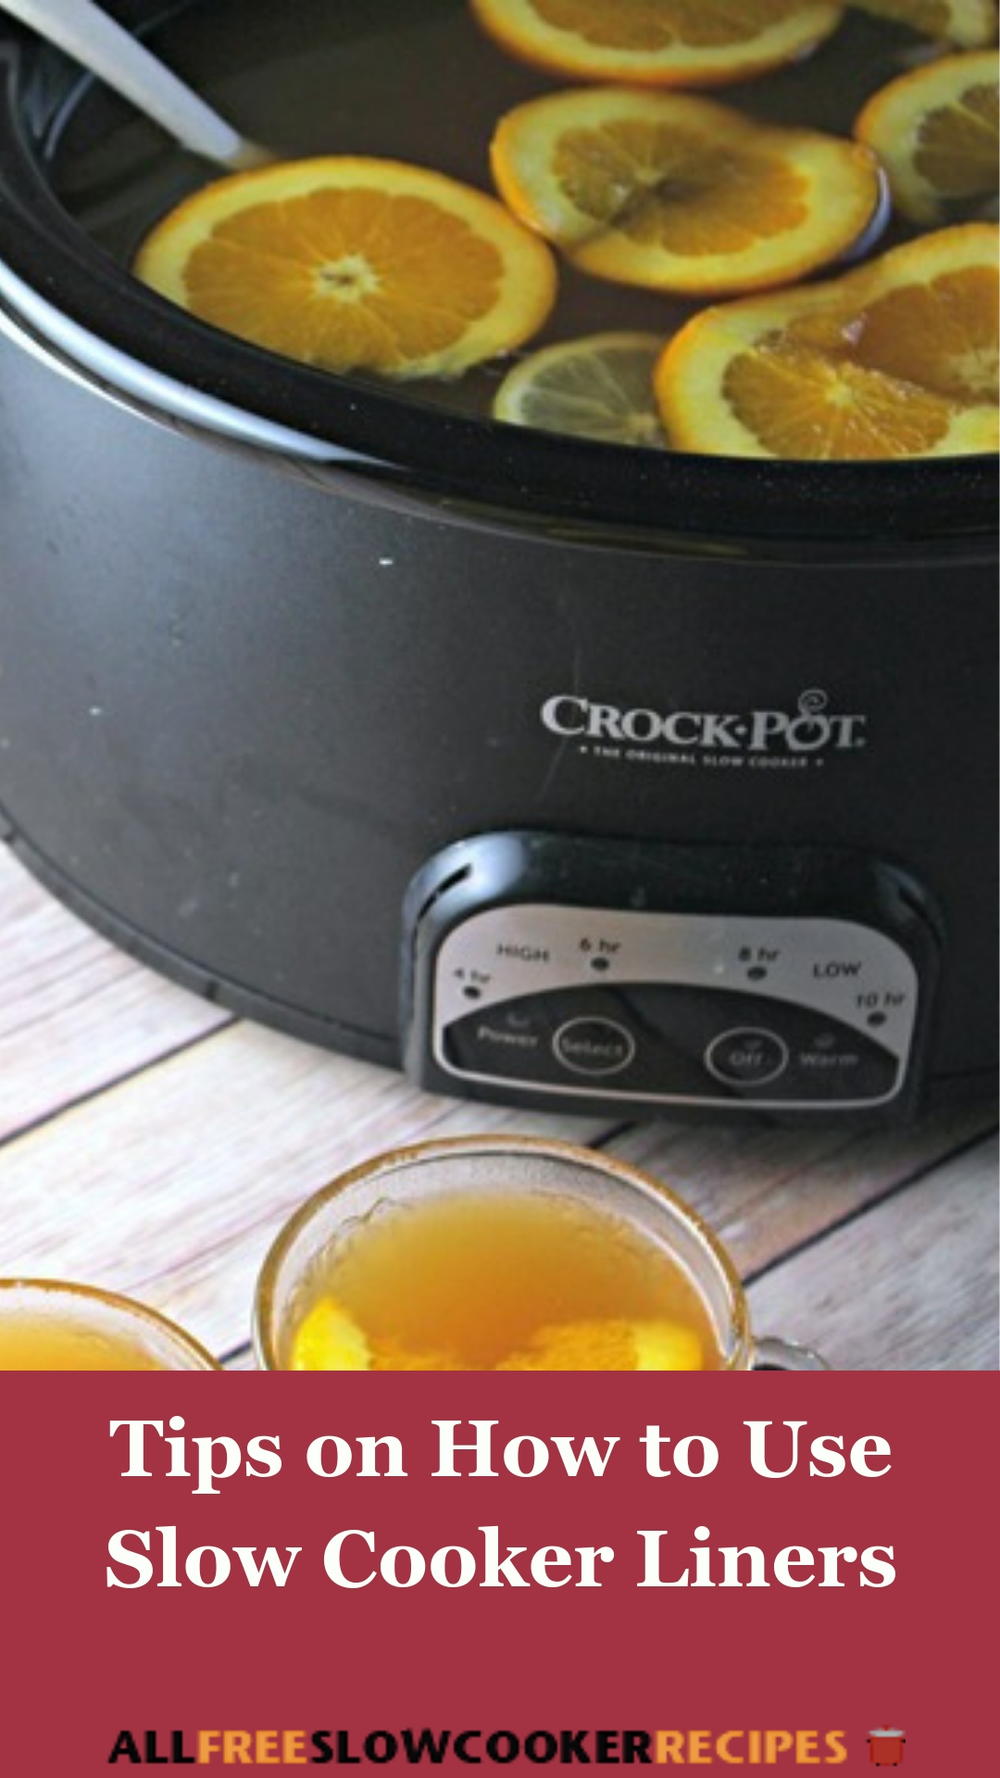 https://irepo.primecp.com/2019/04/407984/Slow-Cooker-Liners_ExtraLarge1000_ID-3174057.jpg?v=3174057